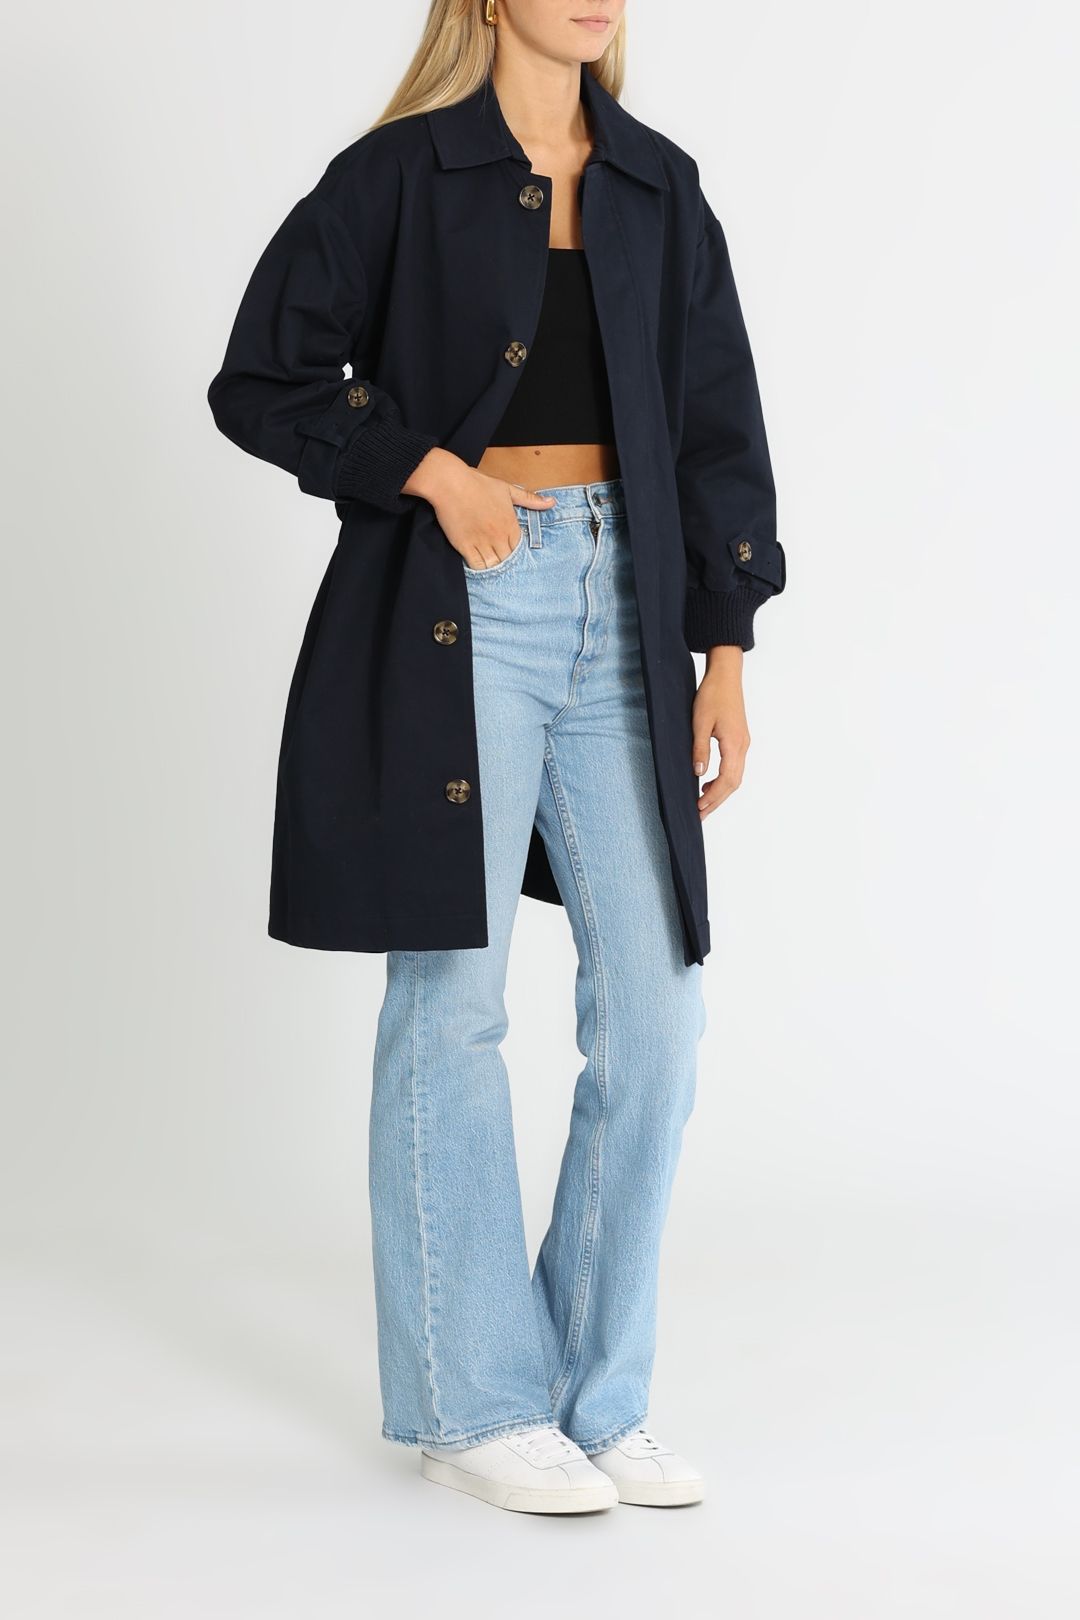 LMND The Ooo Trench Navy Collared